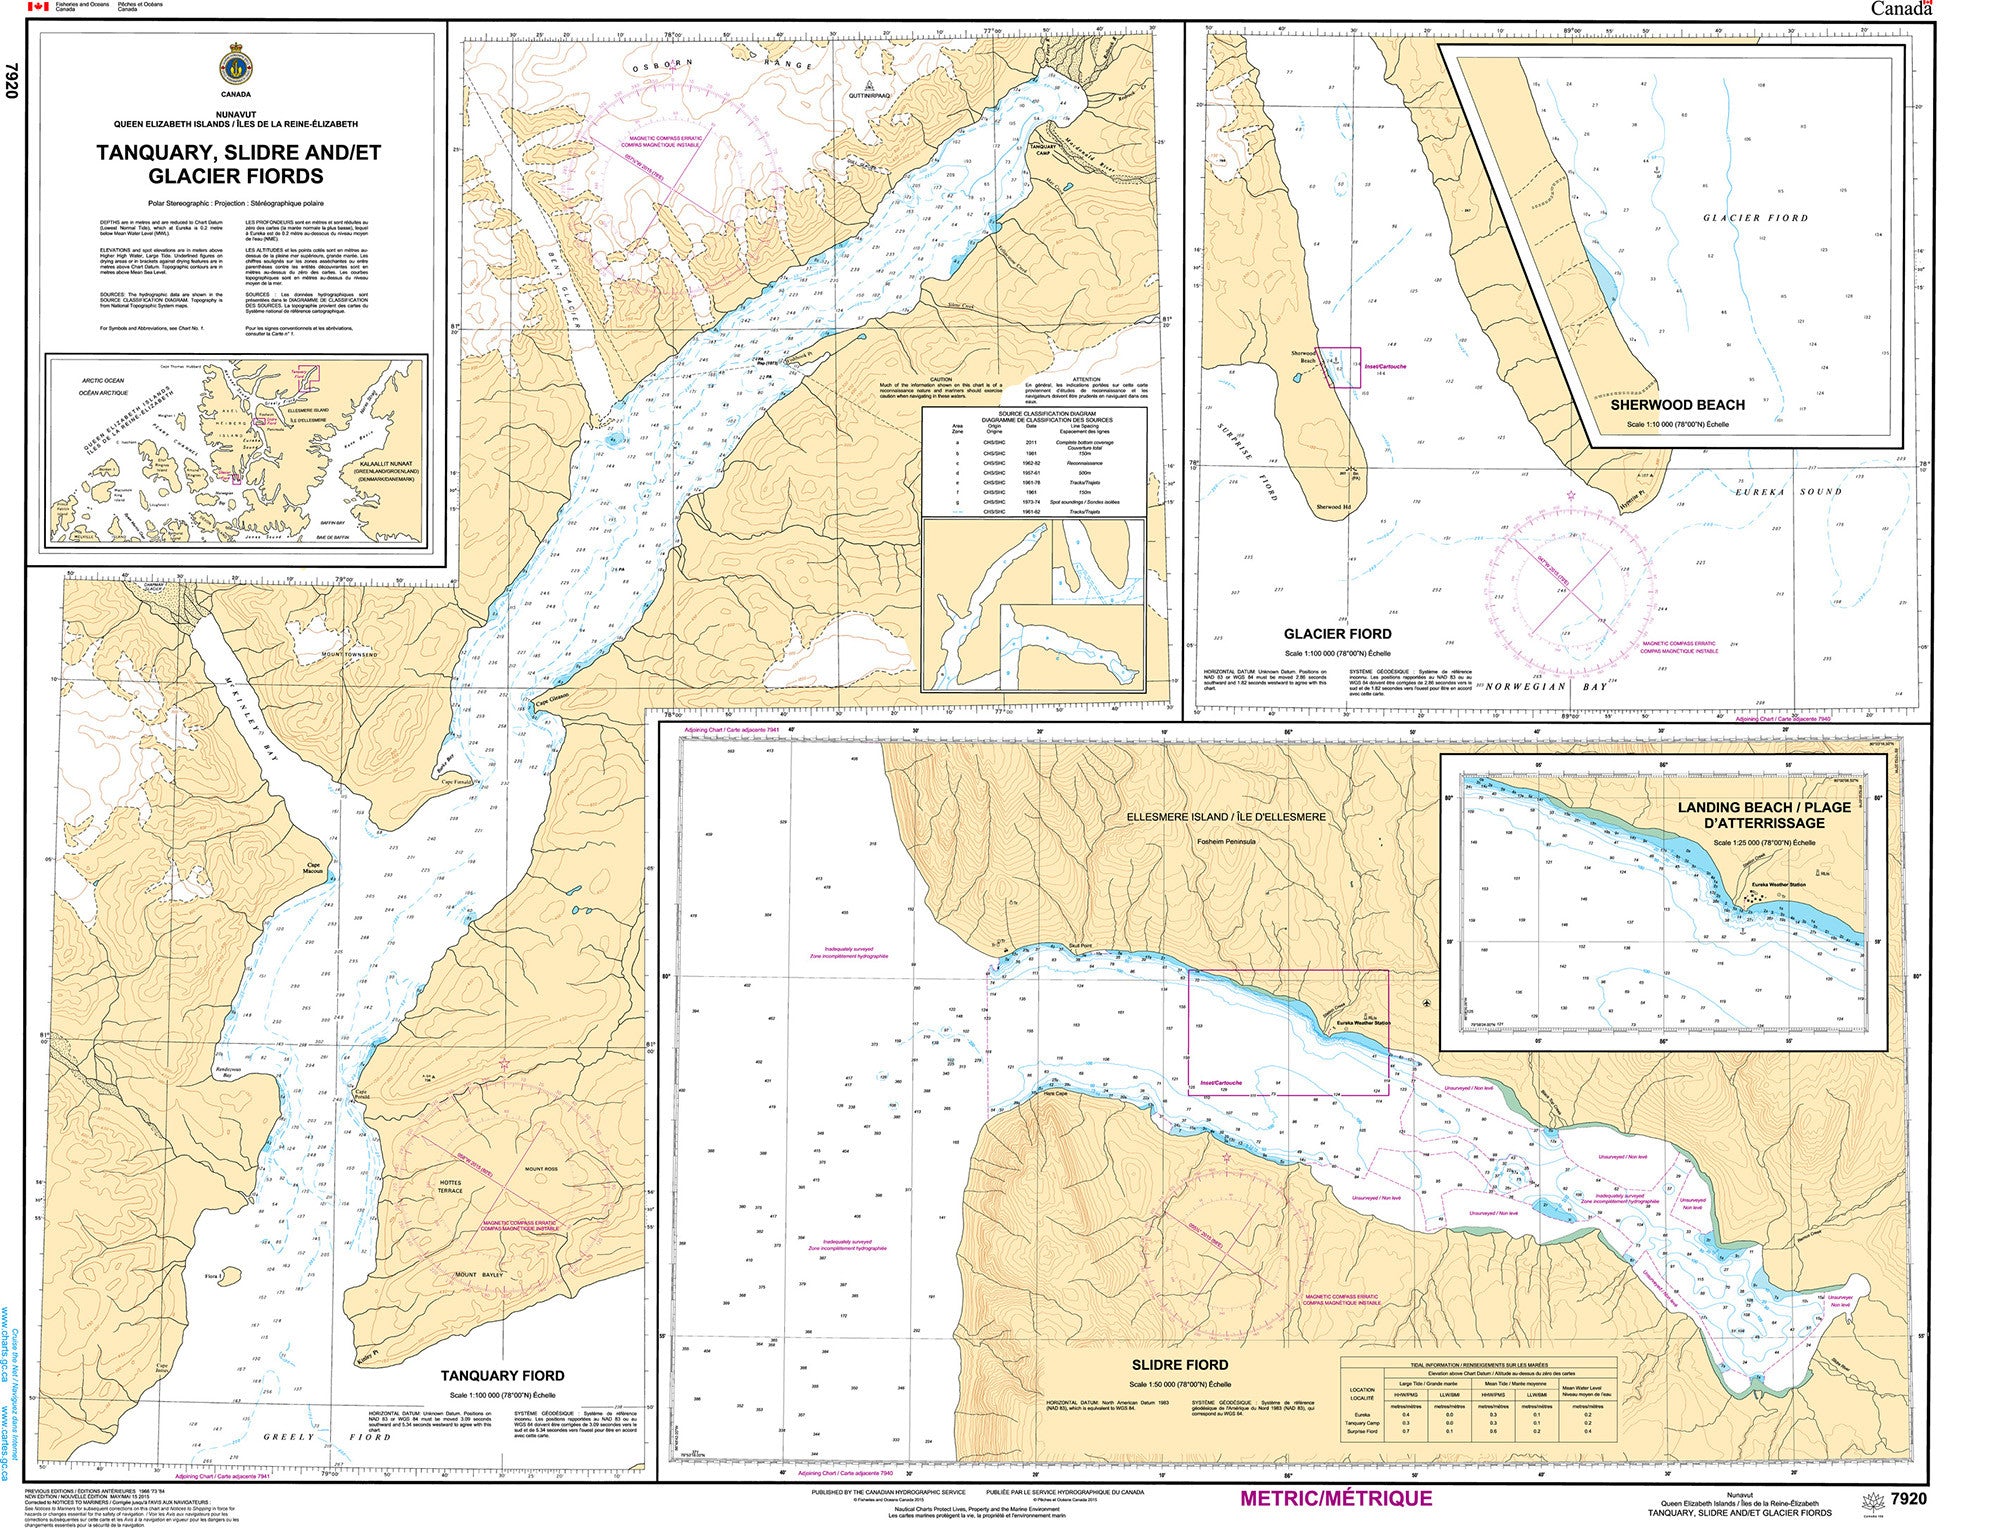 Canadian Hydrographic Service Nautical Chart CHS7920: Tanquary,Slidee and Glacier Fiords